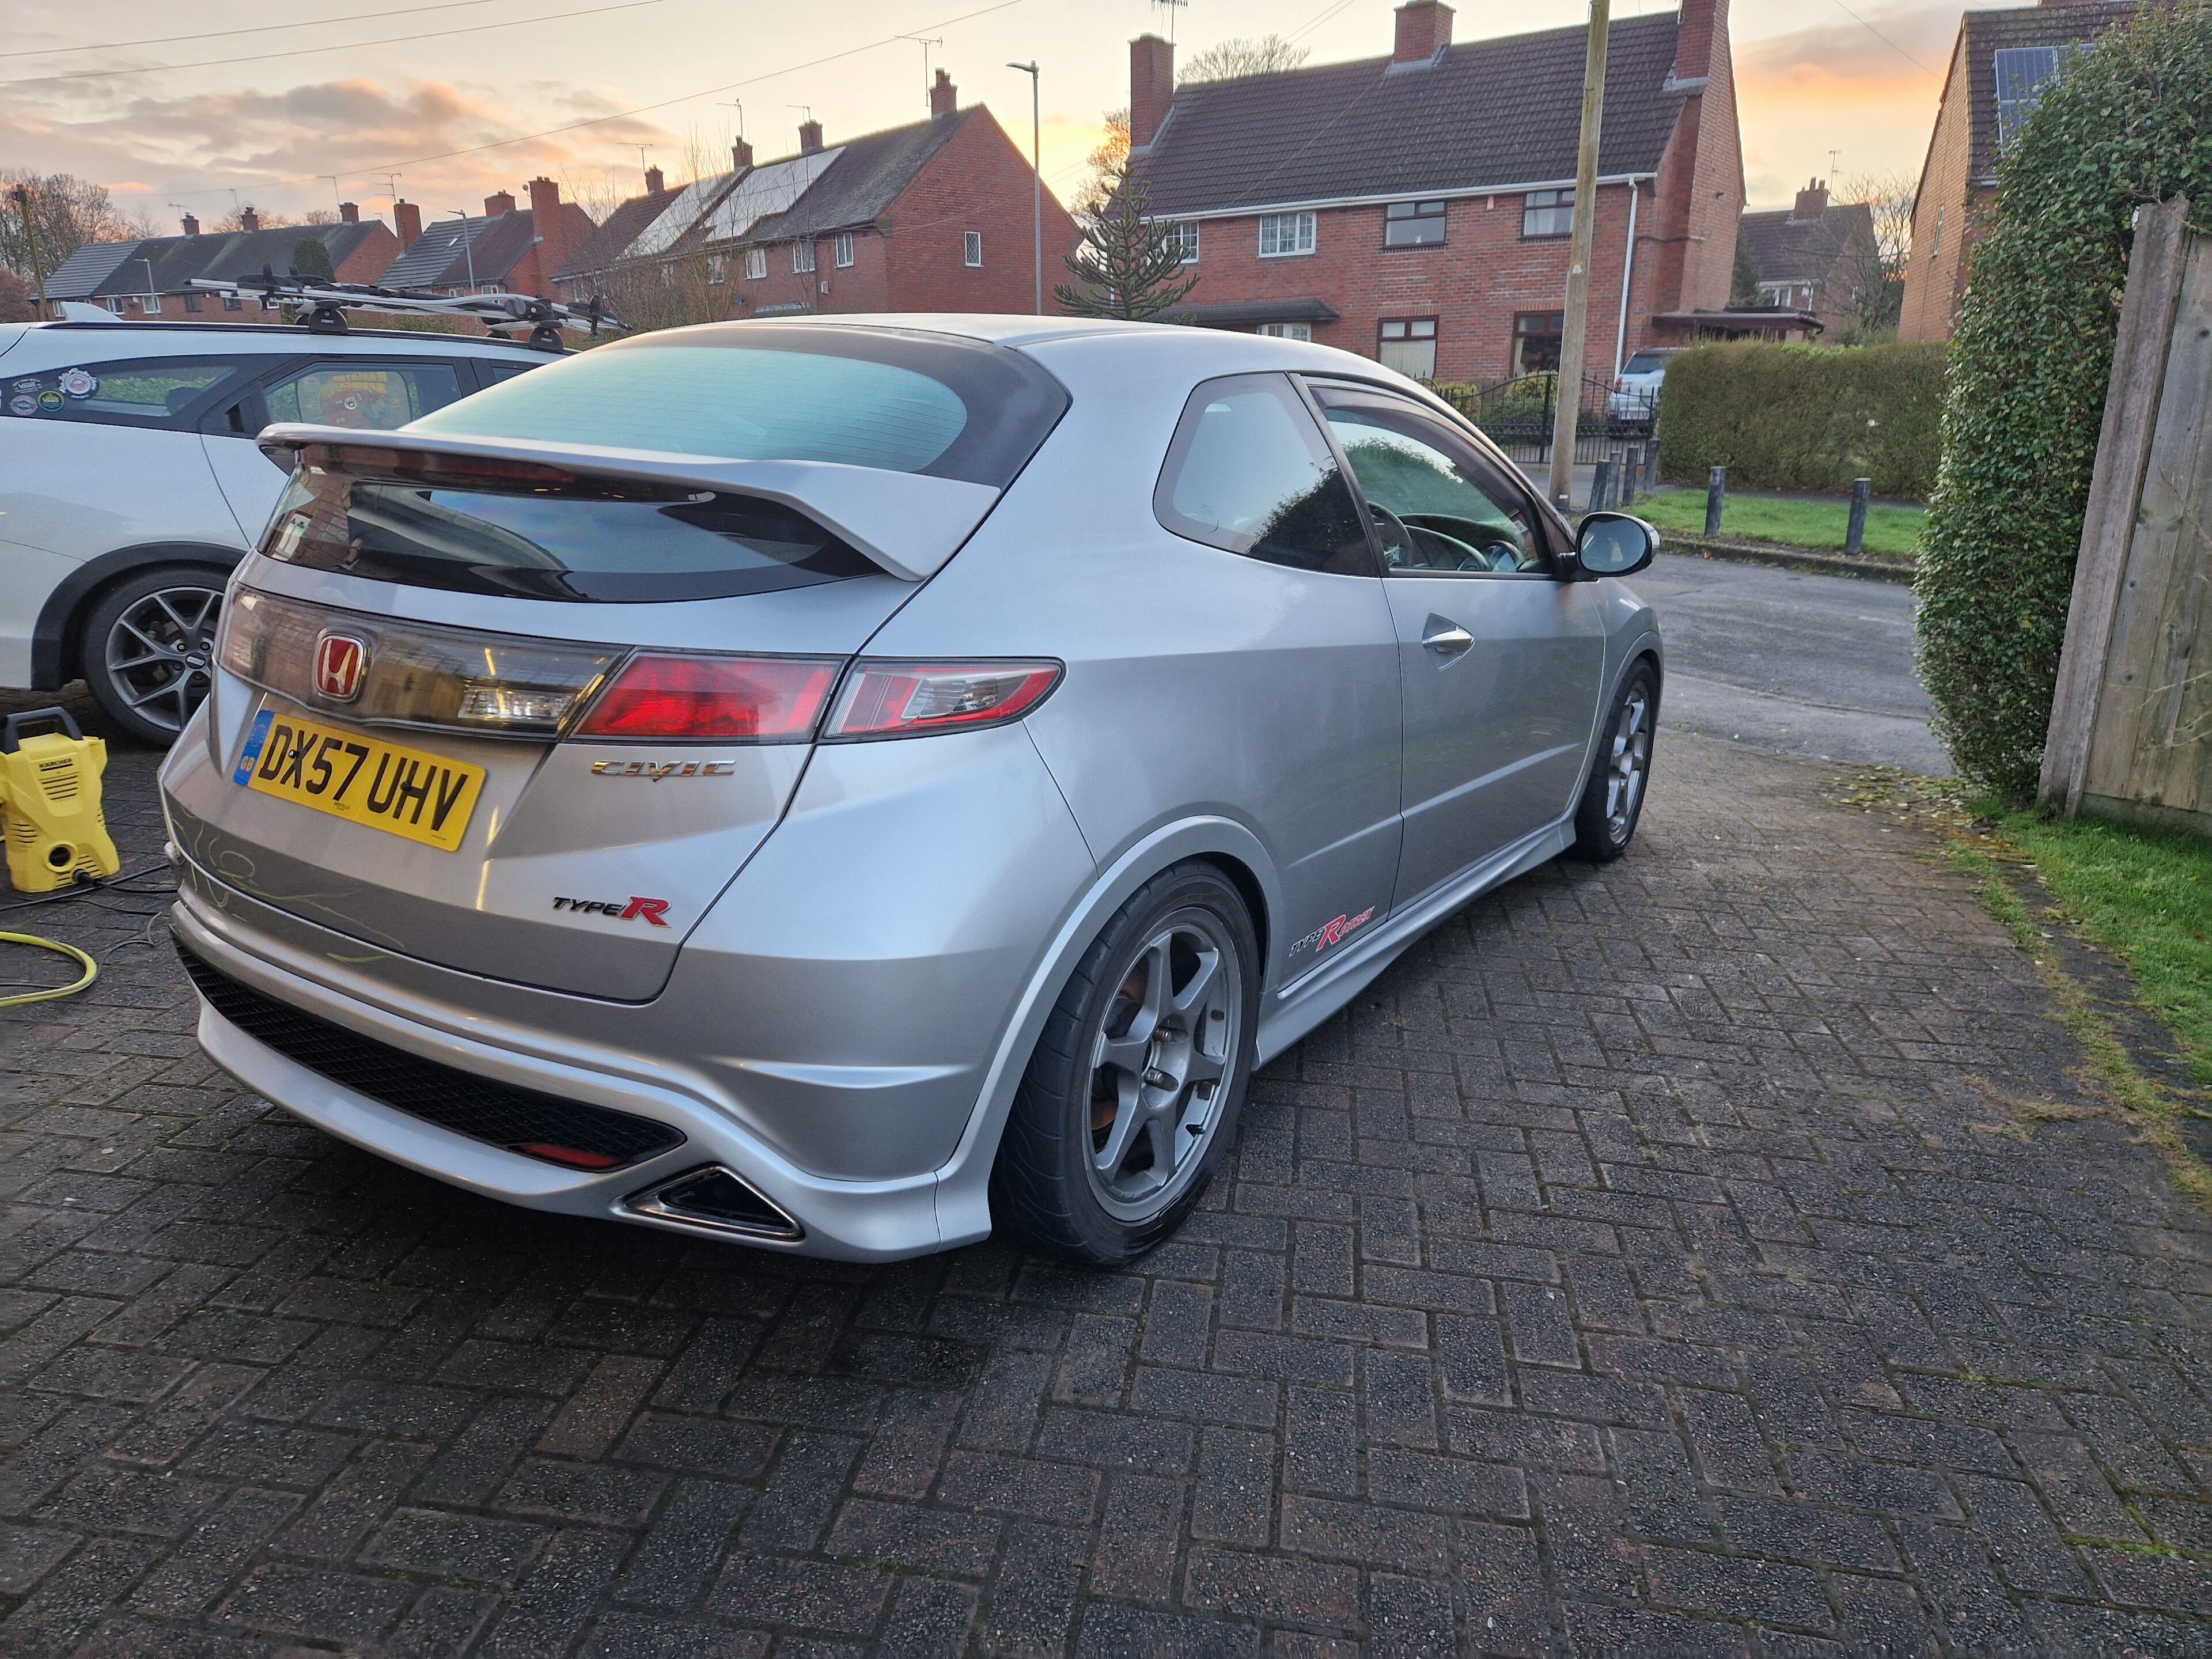 The Bargain Audi's replacement... Civic Type R with a few mo - Page 1 - Readers' Cars - PistonHeads UK - The image shows a silver hatchback parked on a residential street. It's a sunny day, and the car is positioned facing the camera with its doors closed. In front of the car, there are a few cars parked on the driveway, indicating a suburban setting. There is no visible text or branding in the image. The overall scene suggests a quiet, residential area with clear skies.